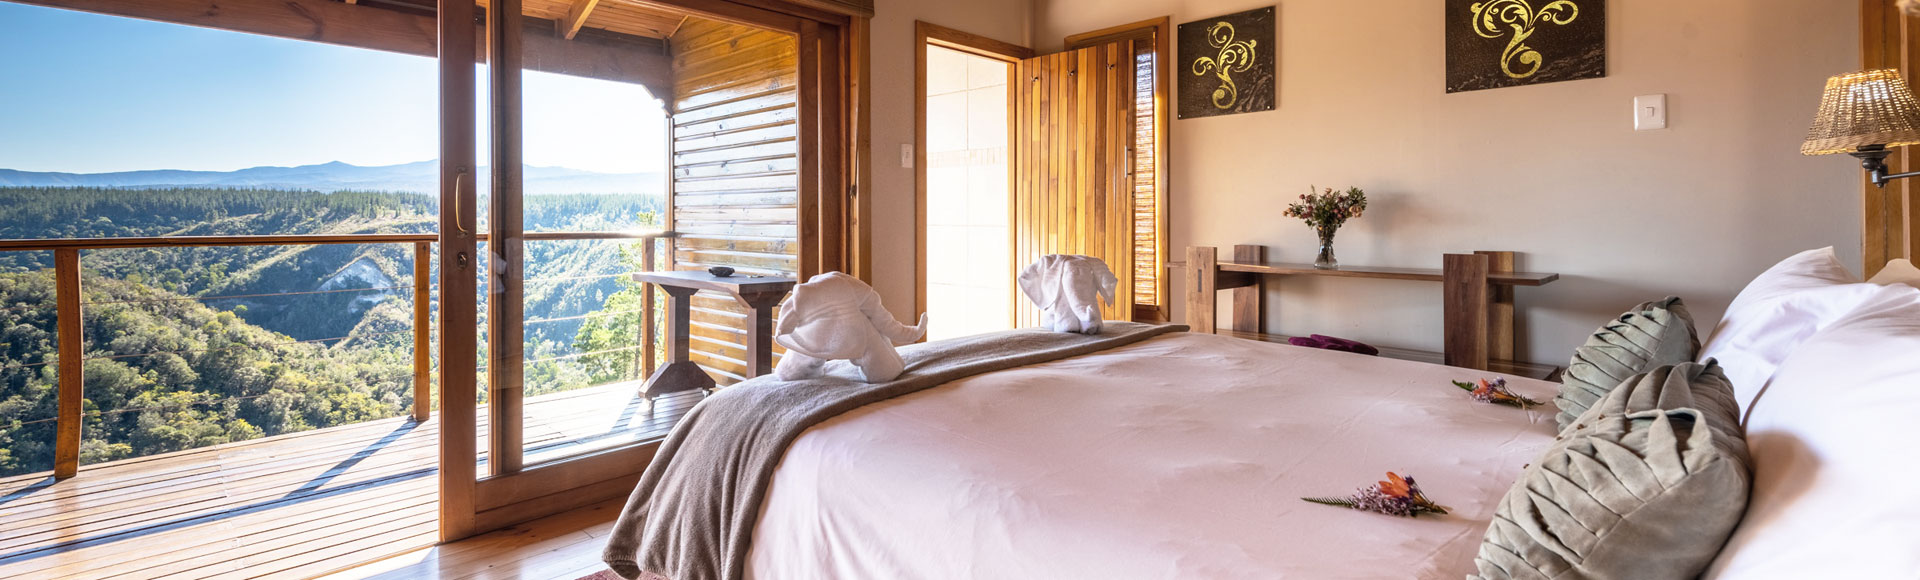 Selfcatering Accommodation Knysna - immaculate, spacious and elegant Knysna forest cottages with fantastic views - honeymoon accommodation Knysna.